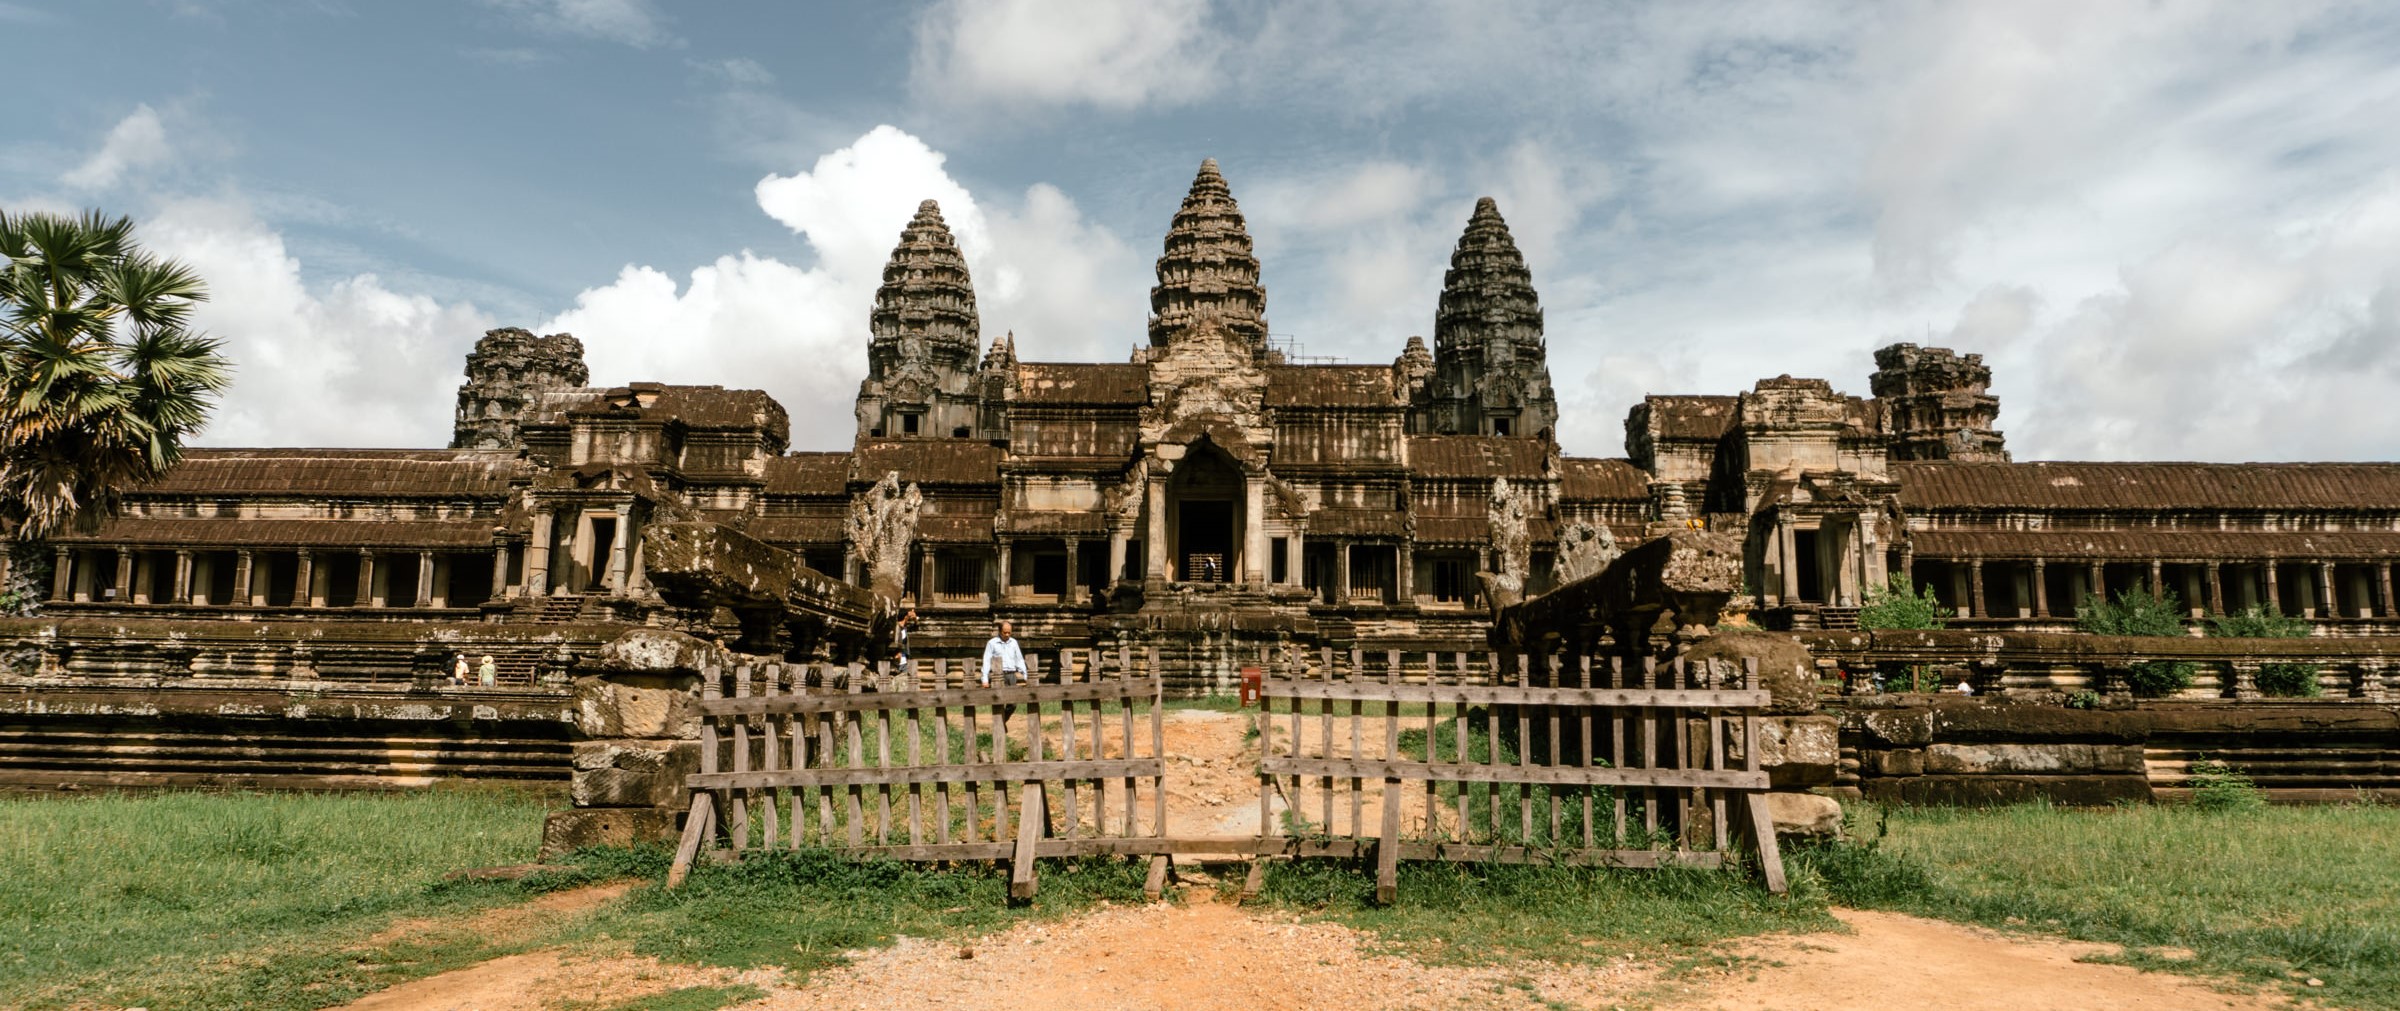 Hindu Temple Angkor Wat Complex In Cambodia Is The World’s Largest Religious Structure!